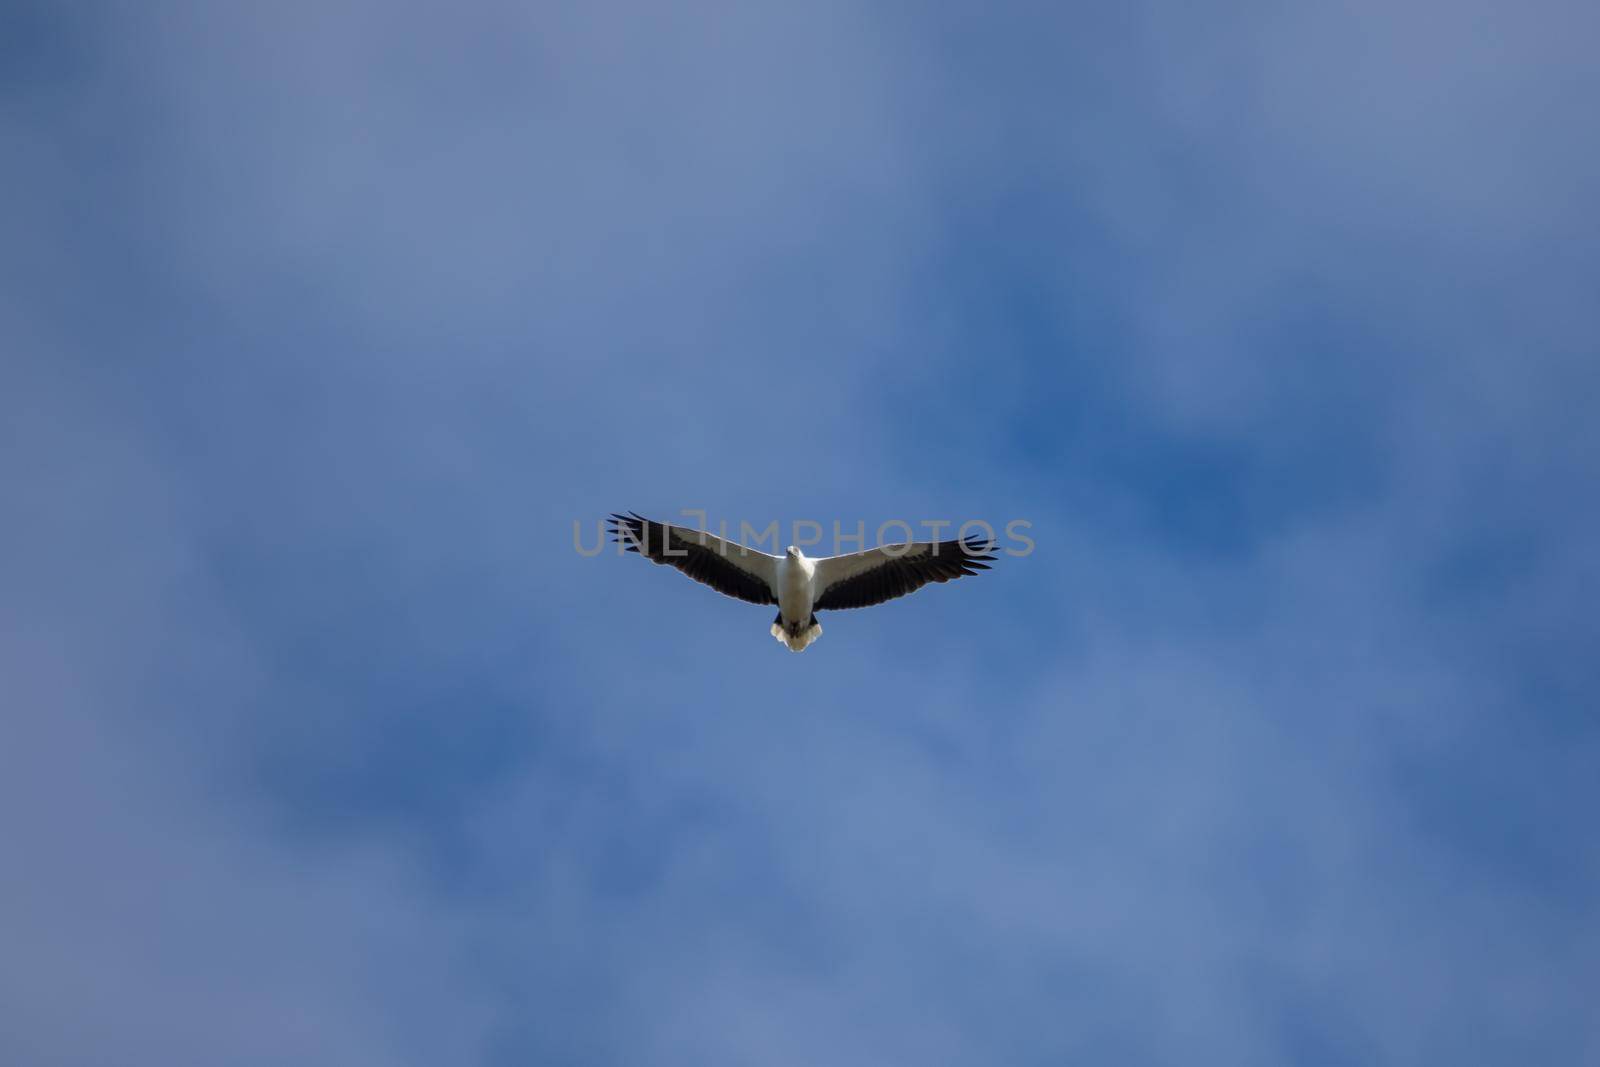 White-bellied sea eagle flying in the air. by braydenstanfordphoto